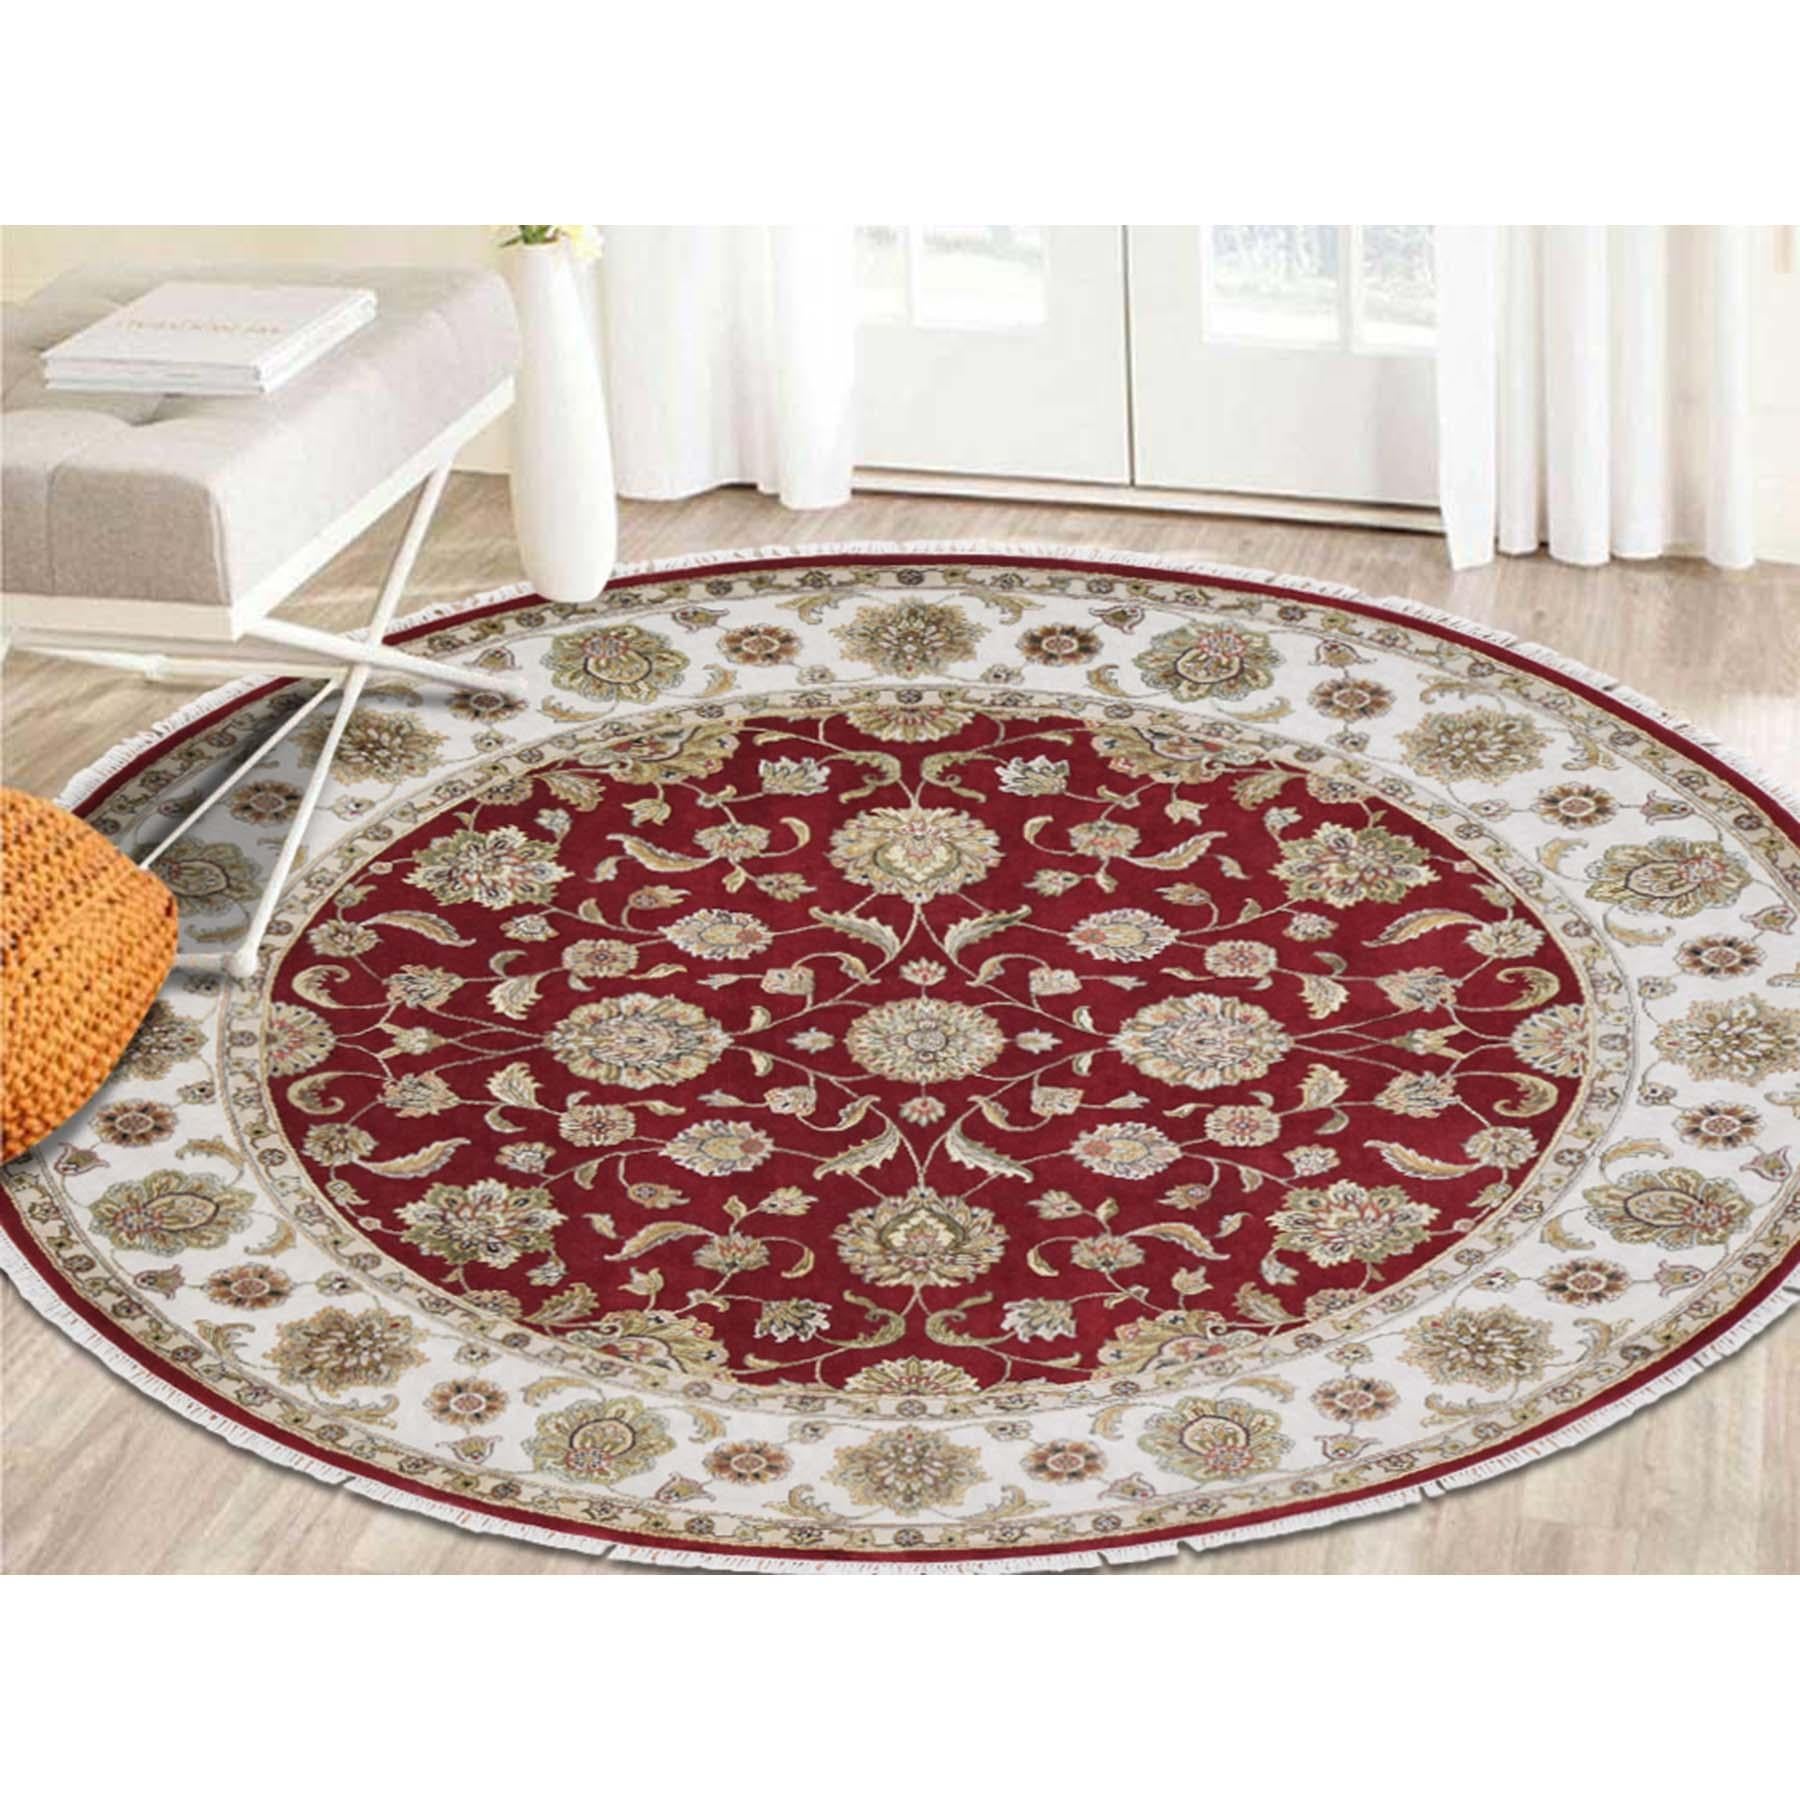 This is a truly genuine one-of-a-kind round wool and silk red Rajasthan hand knotted Oriental rug. It has been knotted for months and months in the centuries-old Persian weaving craftsmanship techniques by expert artisans. Measures: 8'0